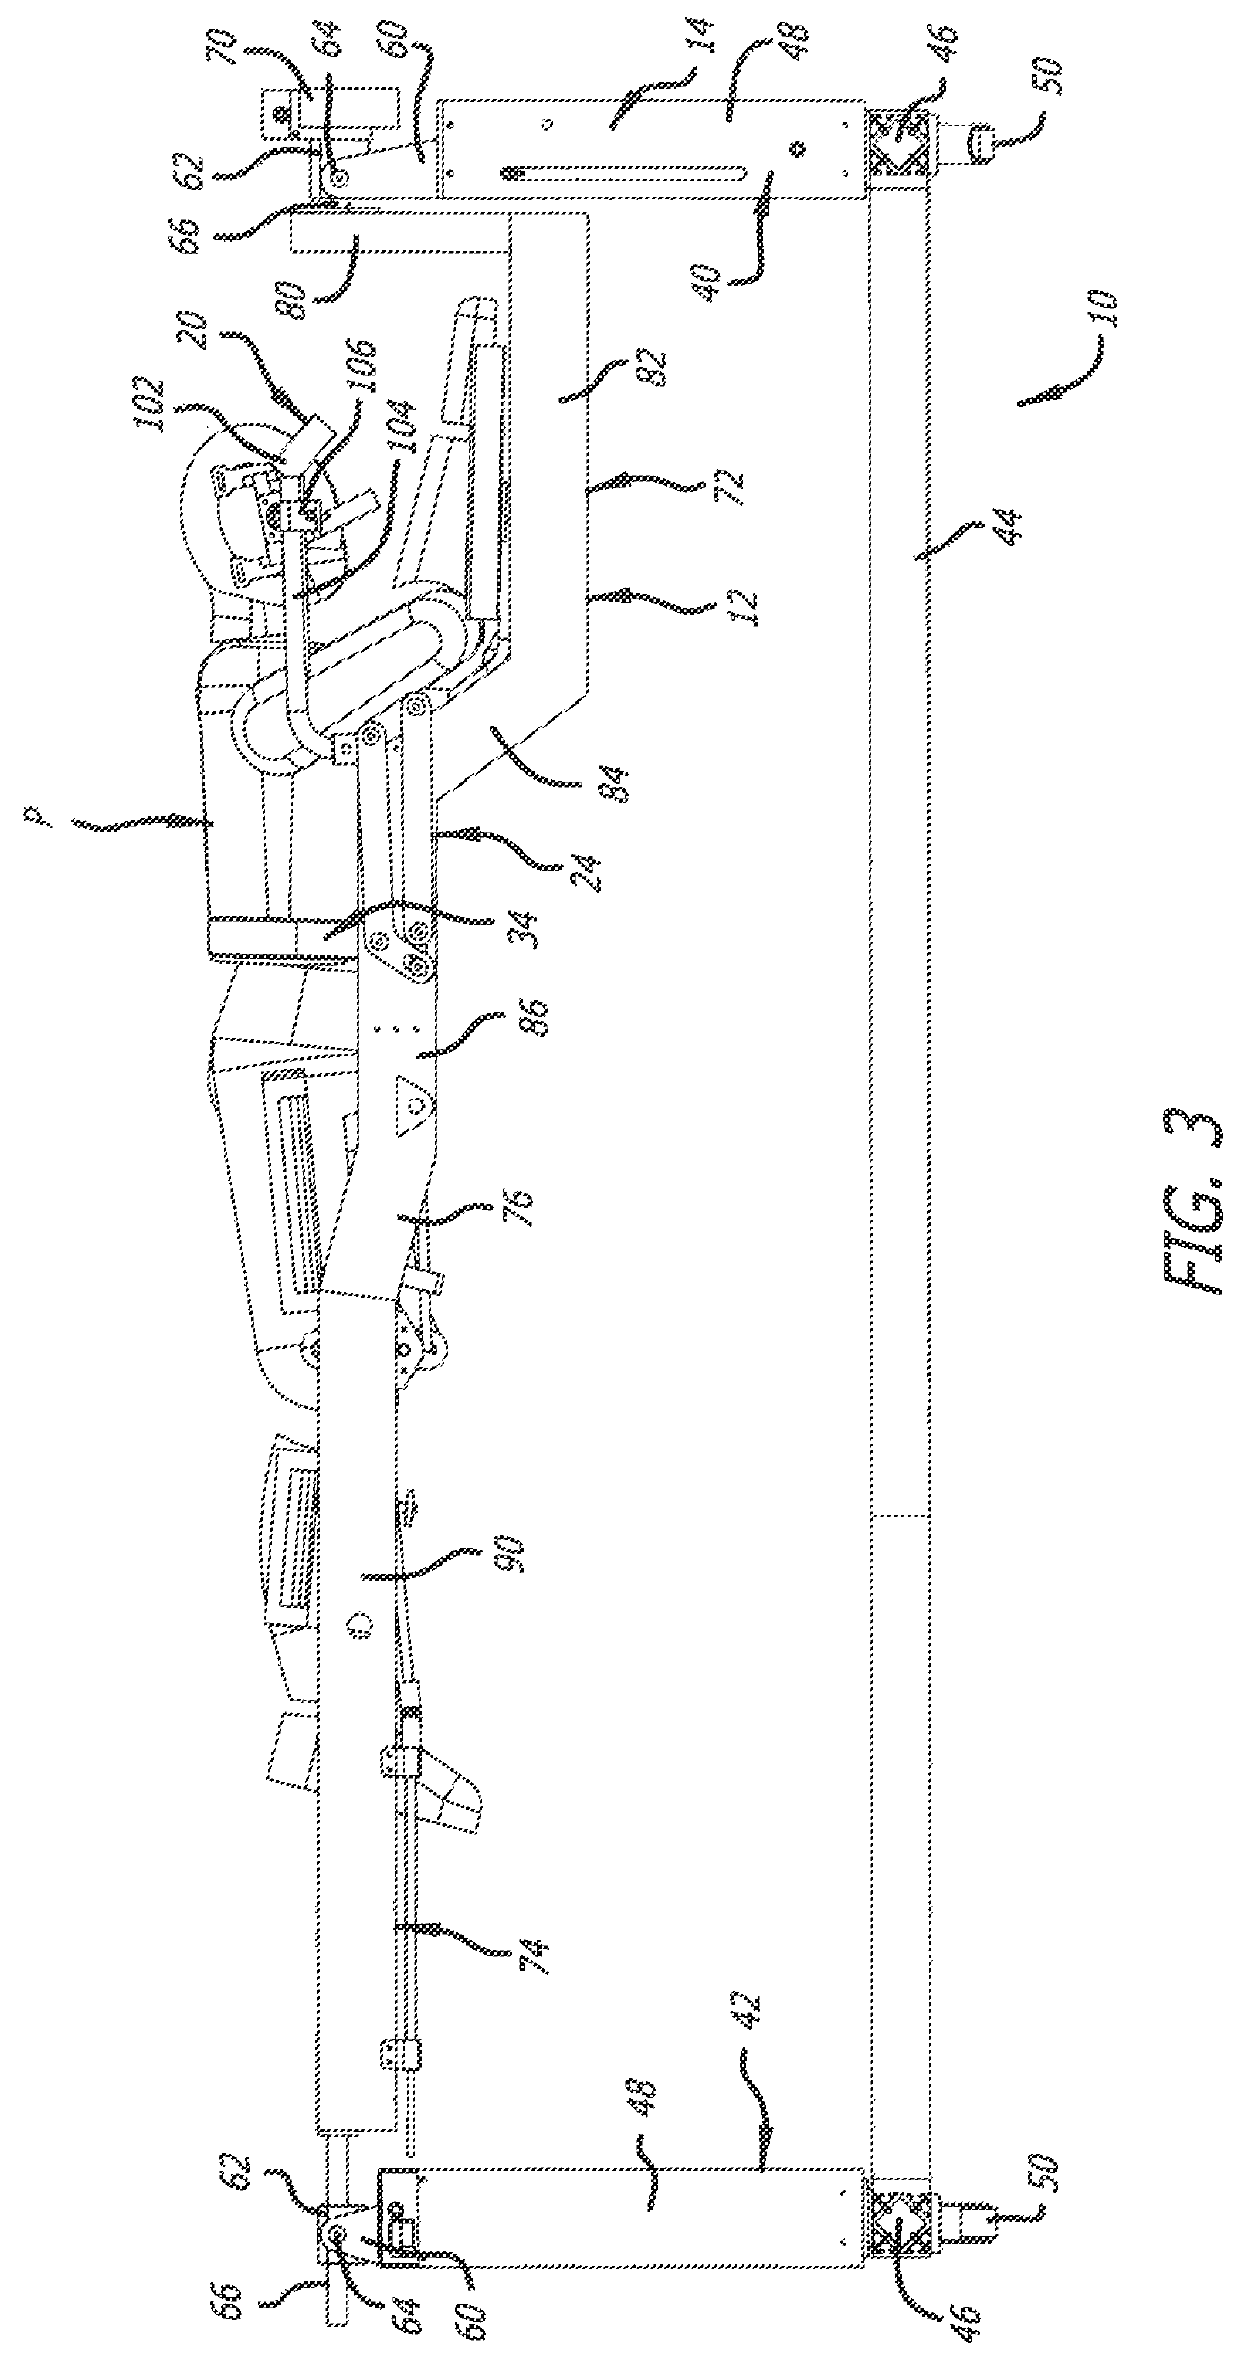 Surgical frame including torso-sling and method for use thereof